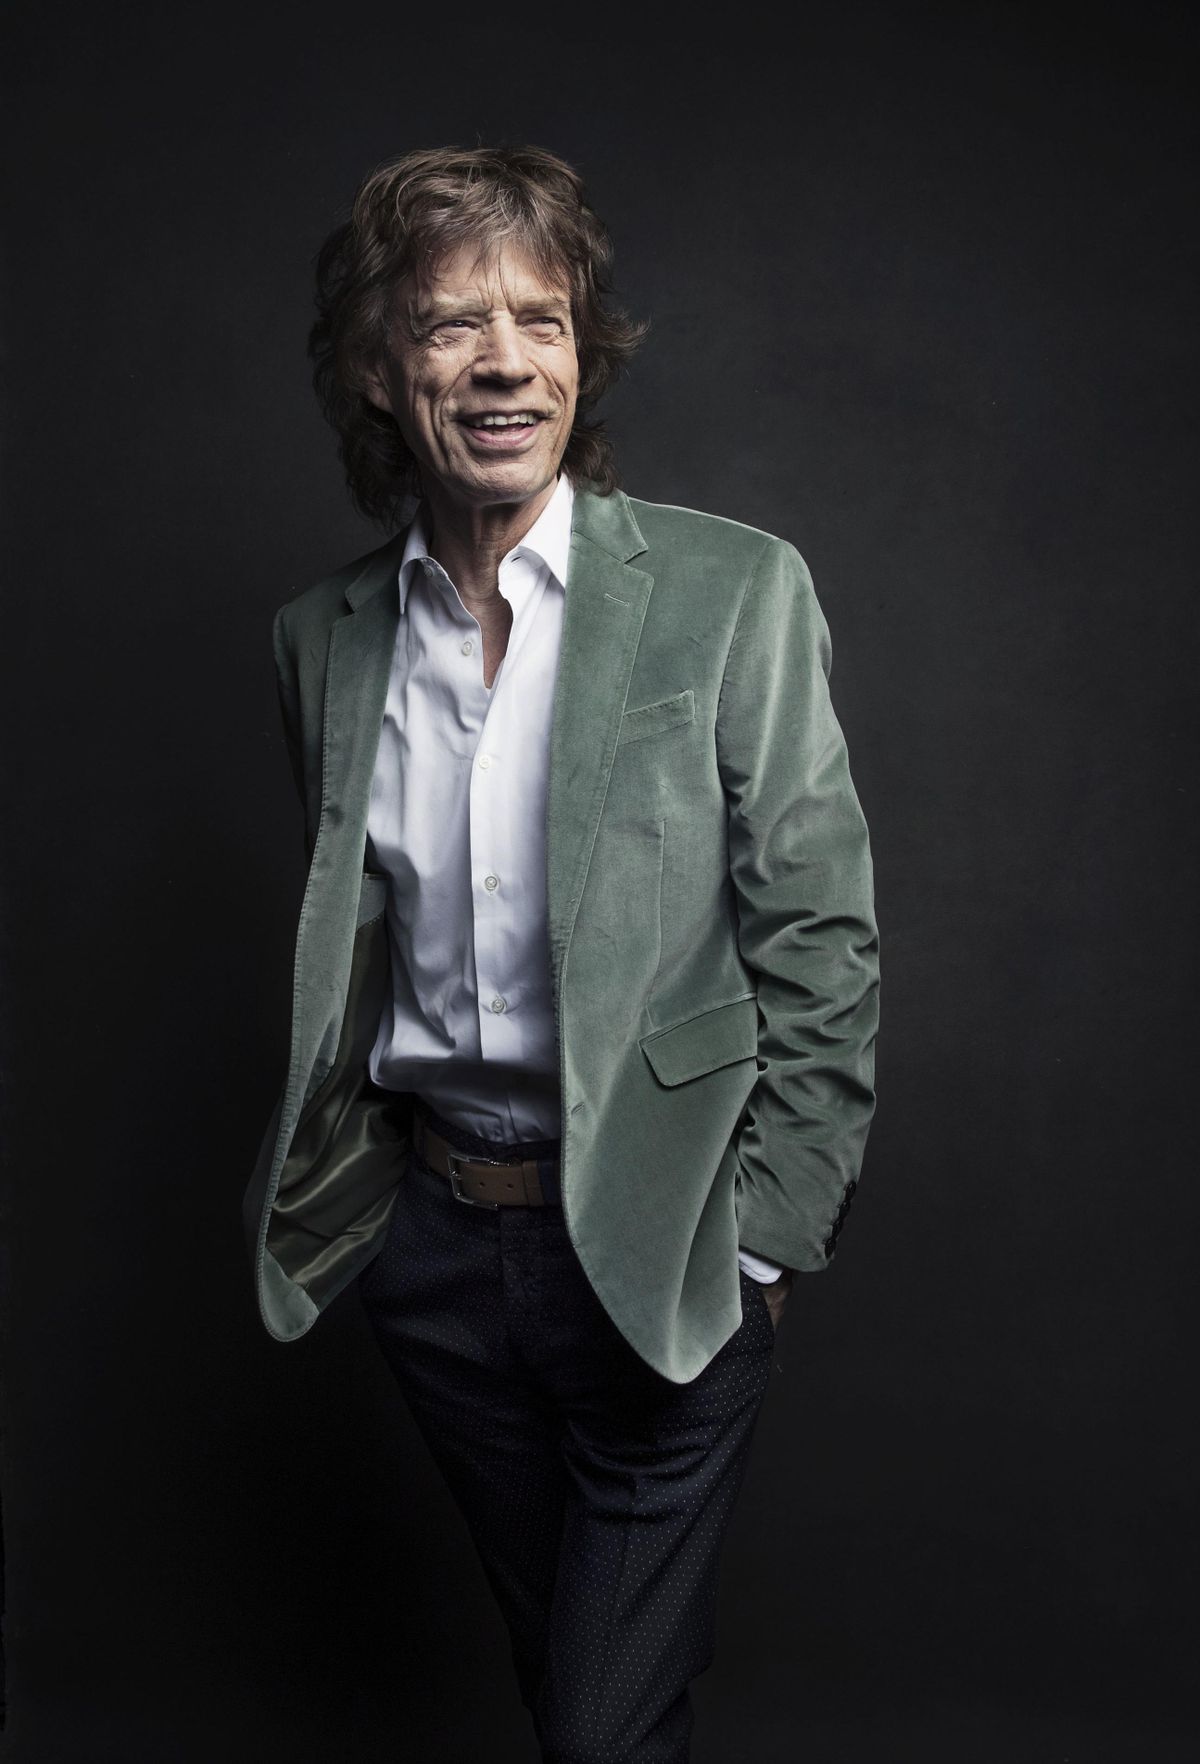 Rolling Stone’s Mick Jagger celebrates birth of 8th child The